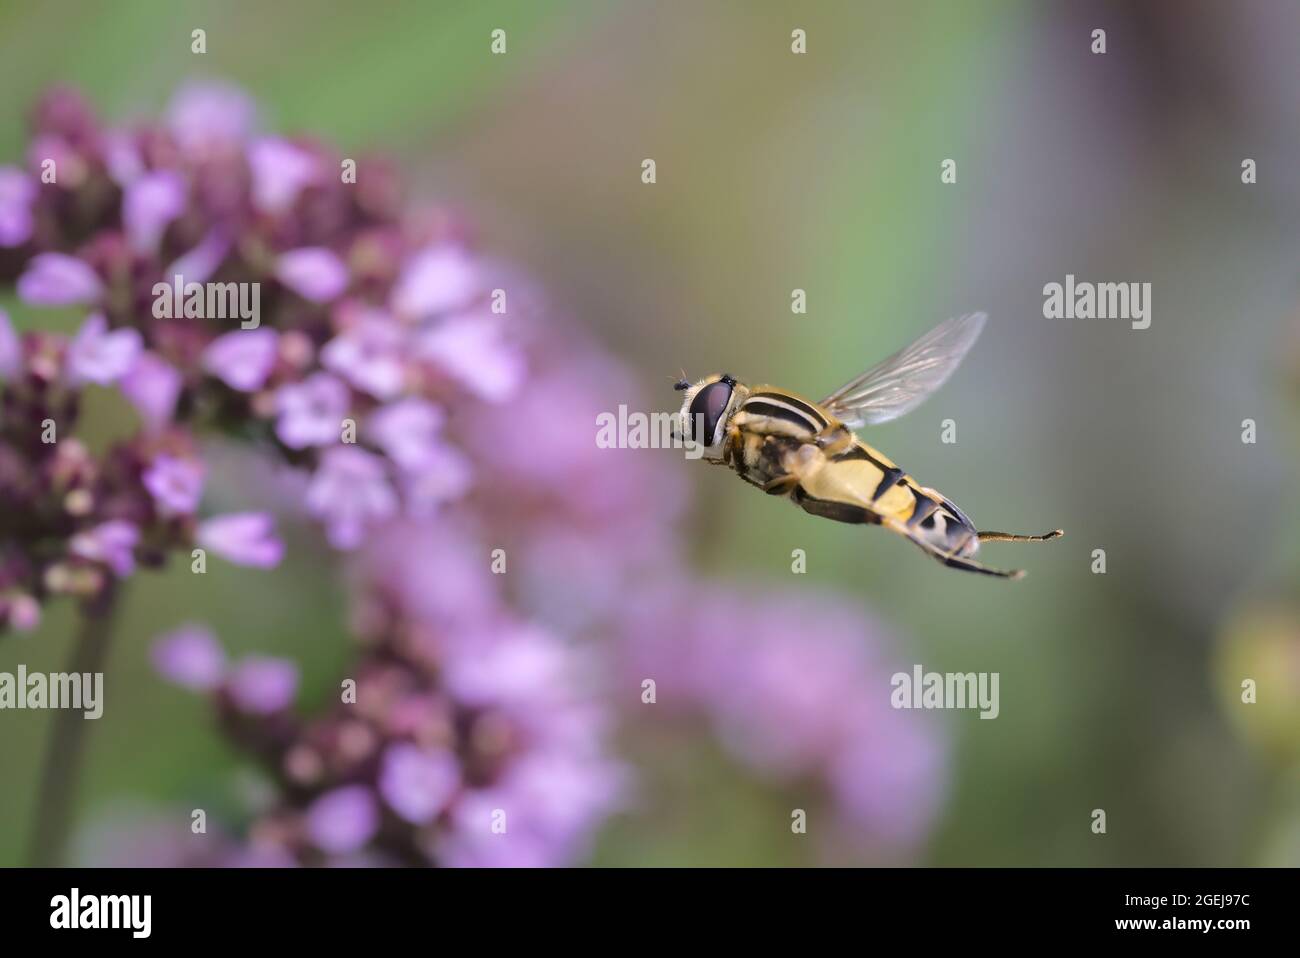 Large Tiger Hoverfly in flight (Helophilus trivittatus), Große Sumpfschwebfliege im Flug, insects in flight with manual focus, close-up/macro Stock Photo